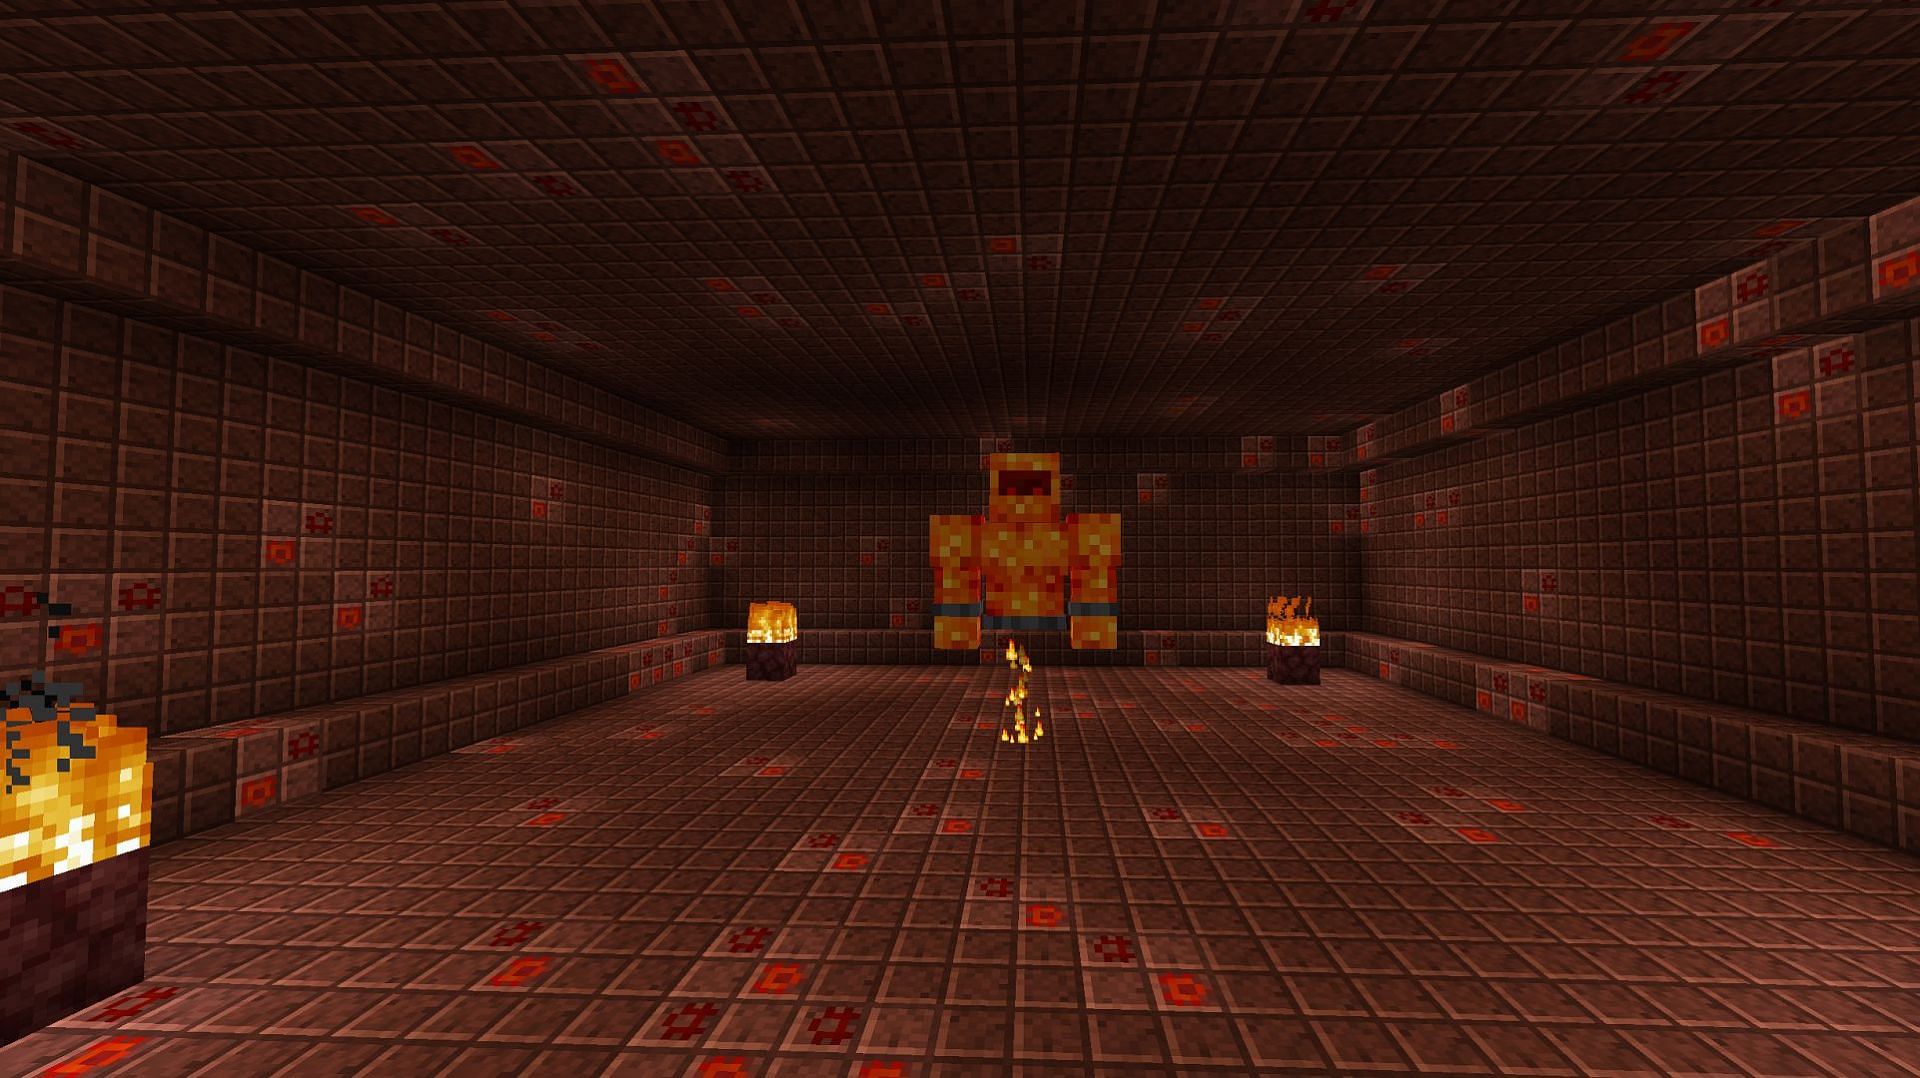 The sun spirit rests in its temple in The Aether Mod (Image via The-Aether-Team/Modrinth)